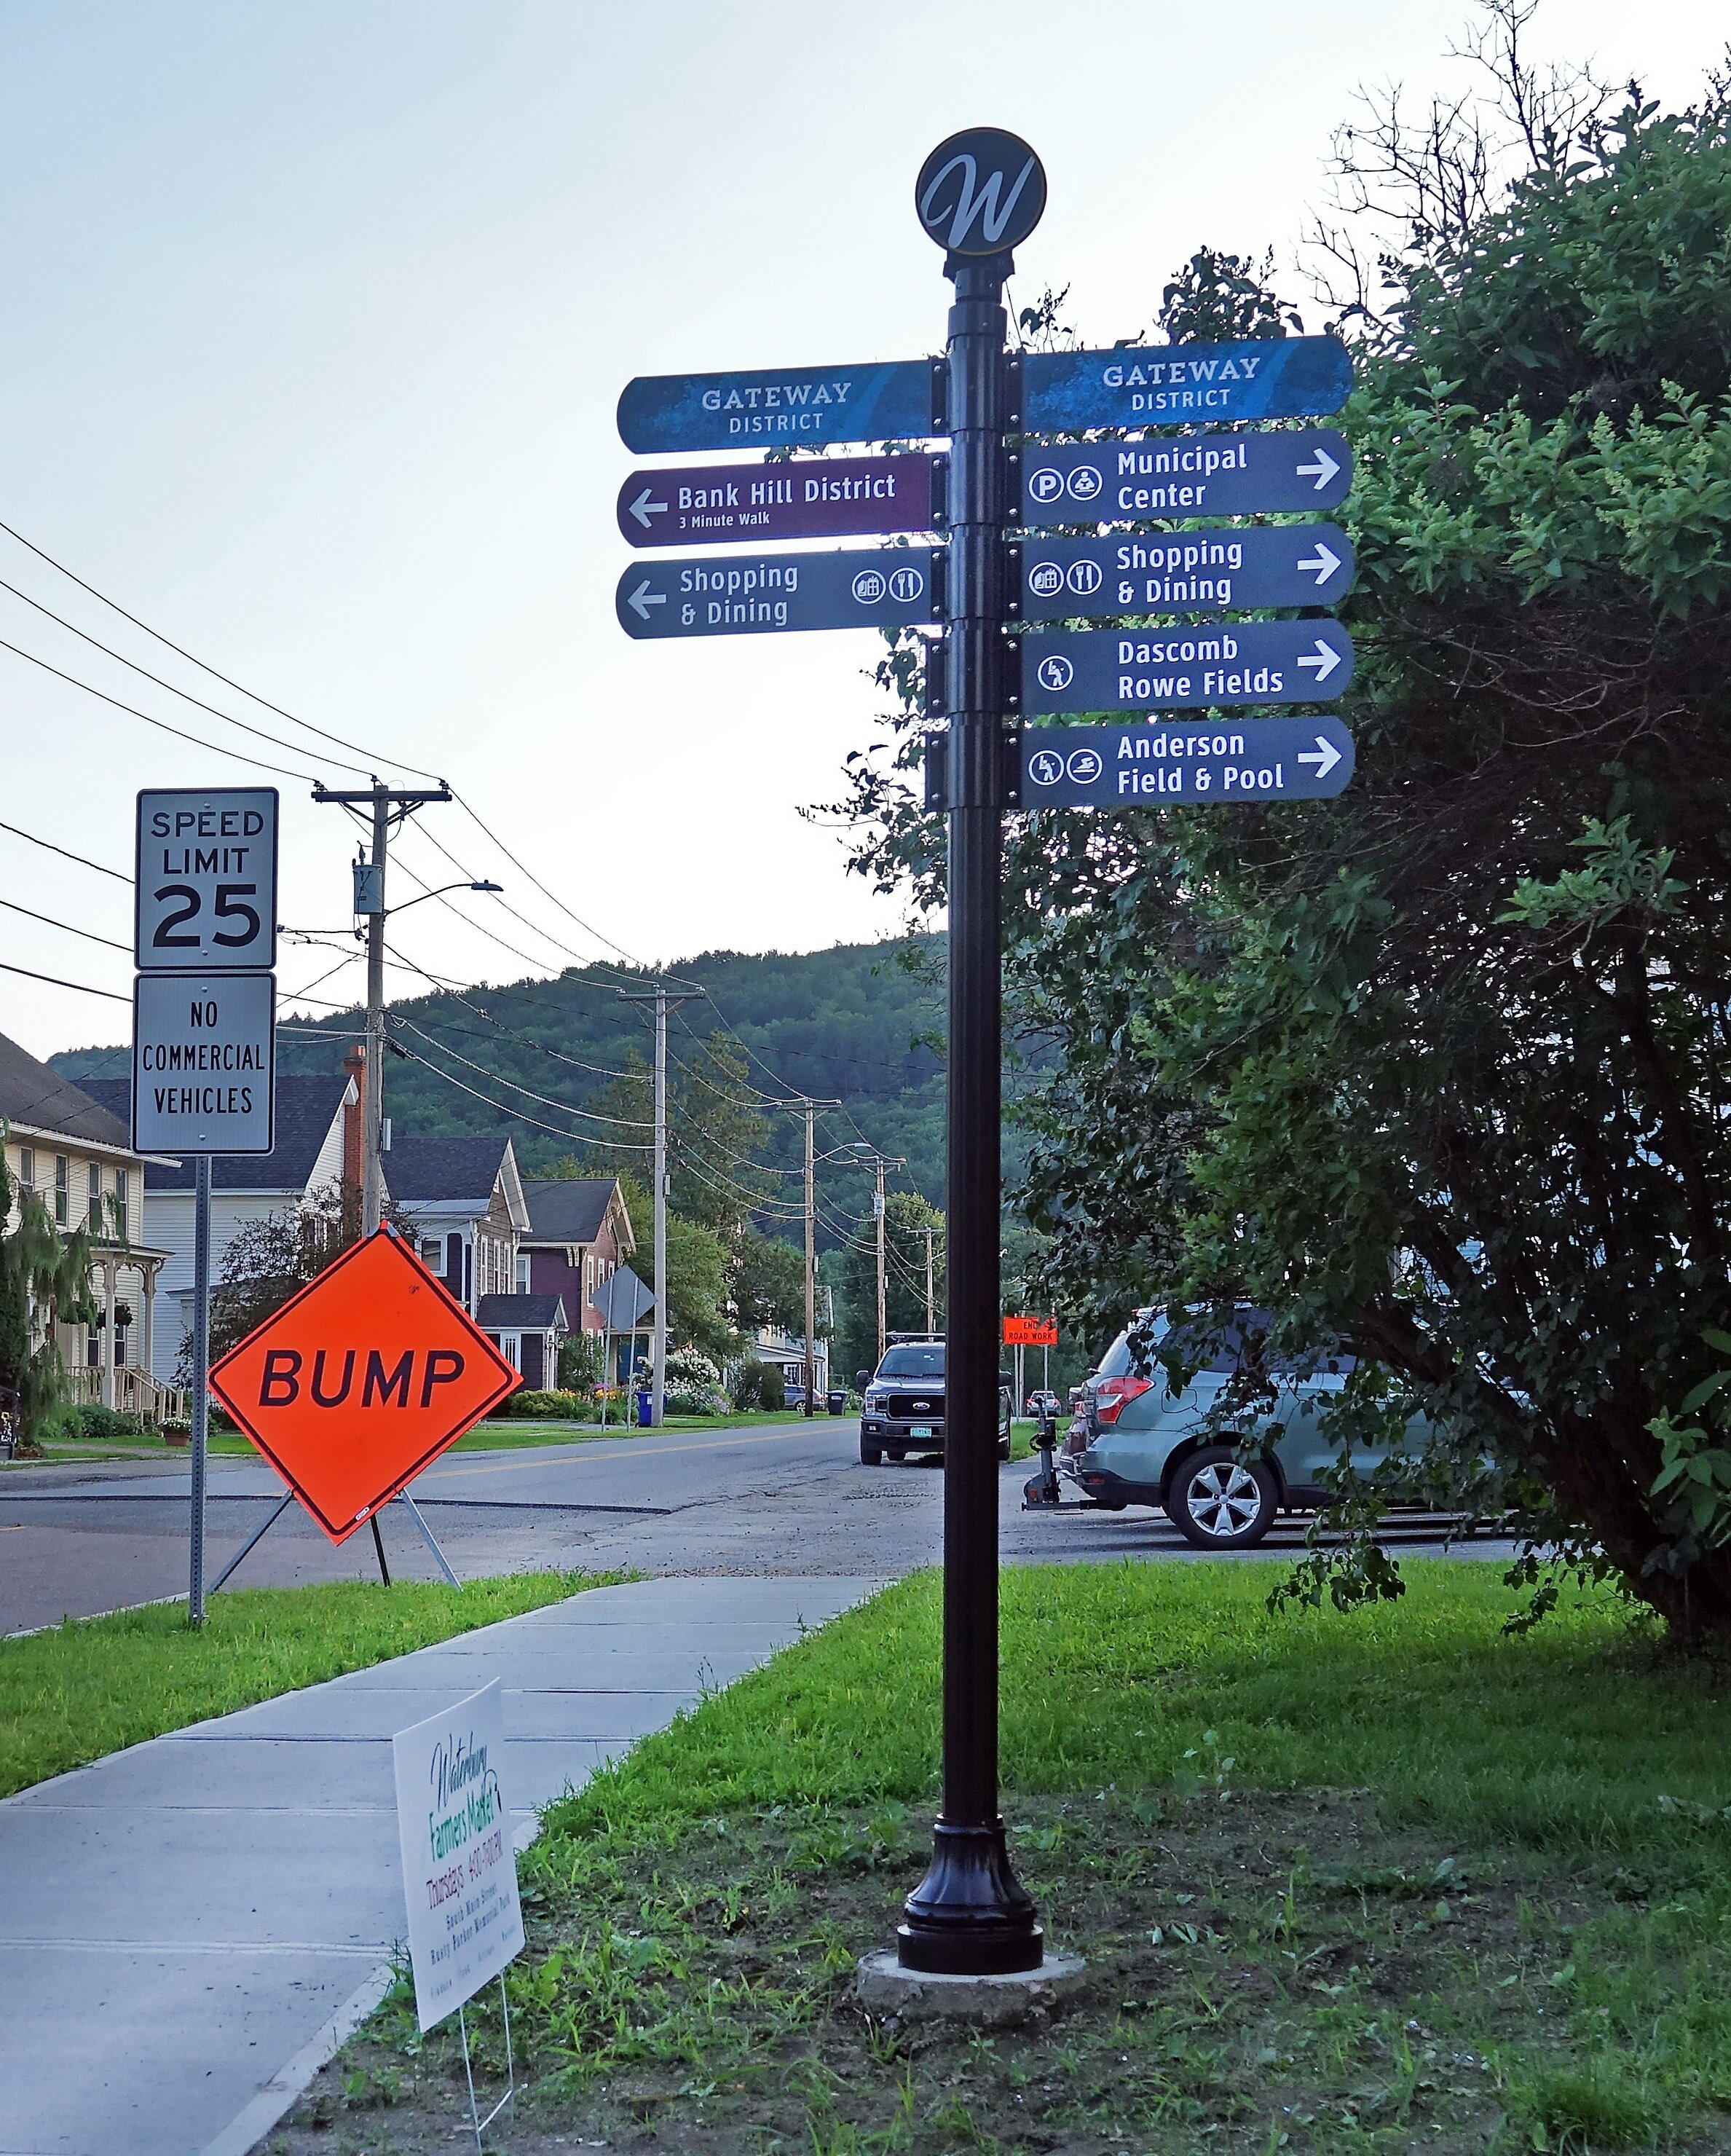   Wayfinding signpost at the corner of North Main and Winooski Streets. Photo by Gordon Miller  